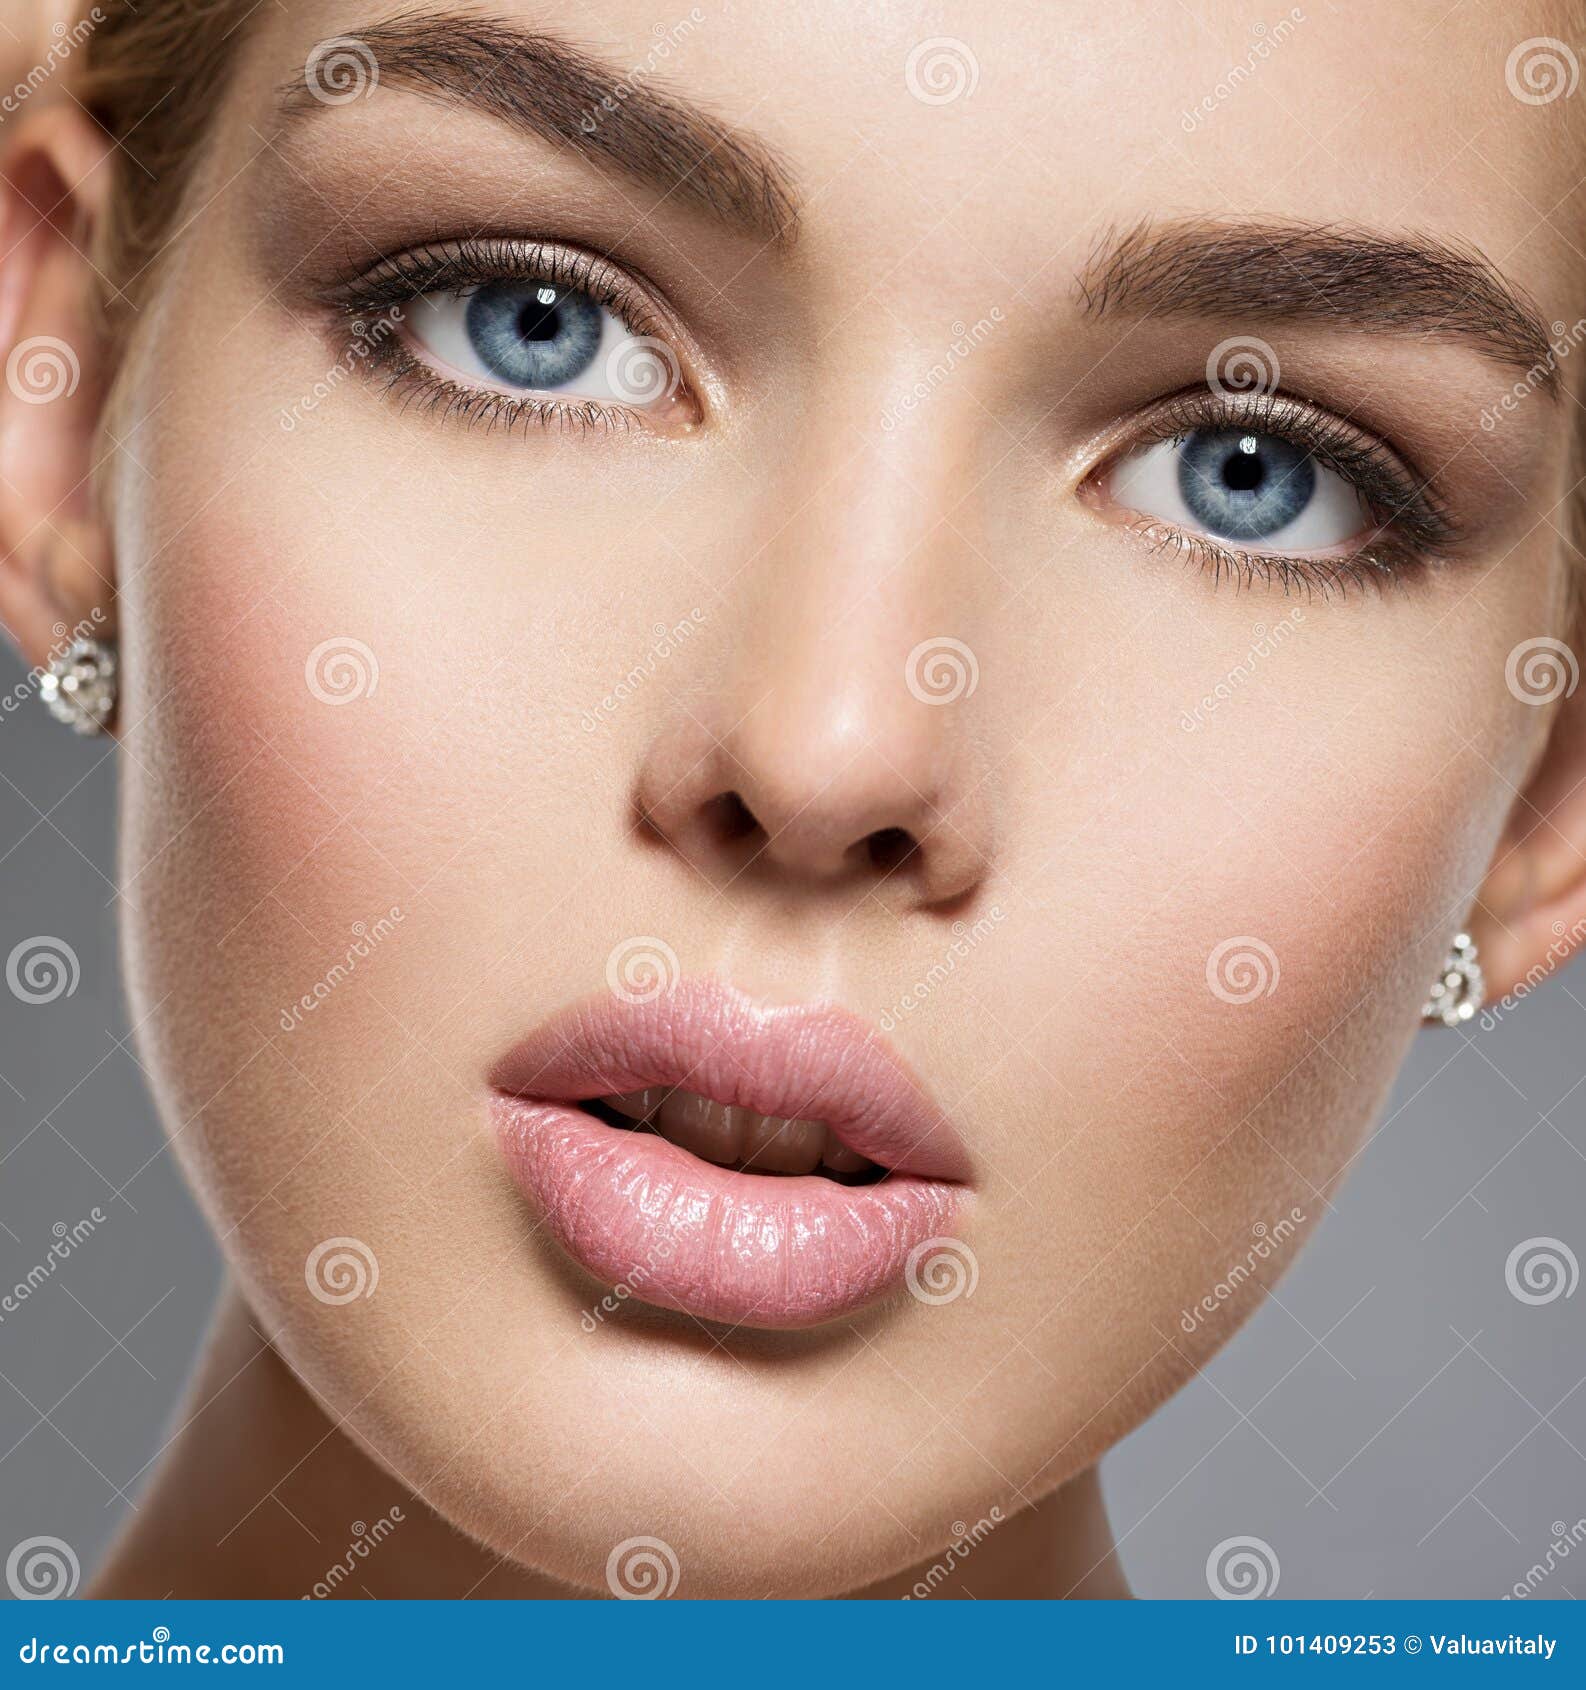 Face Of A Pretty Gorgeous Girl With Blue Eyes Stock Image